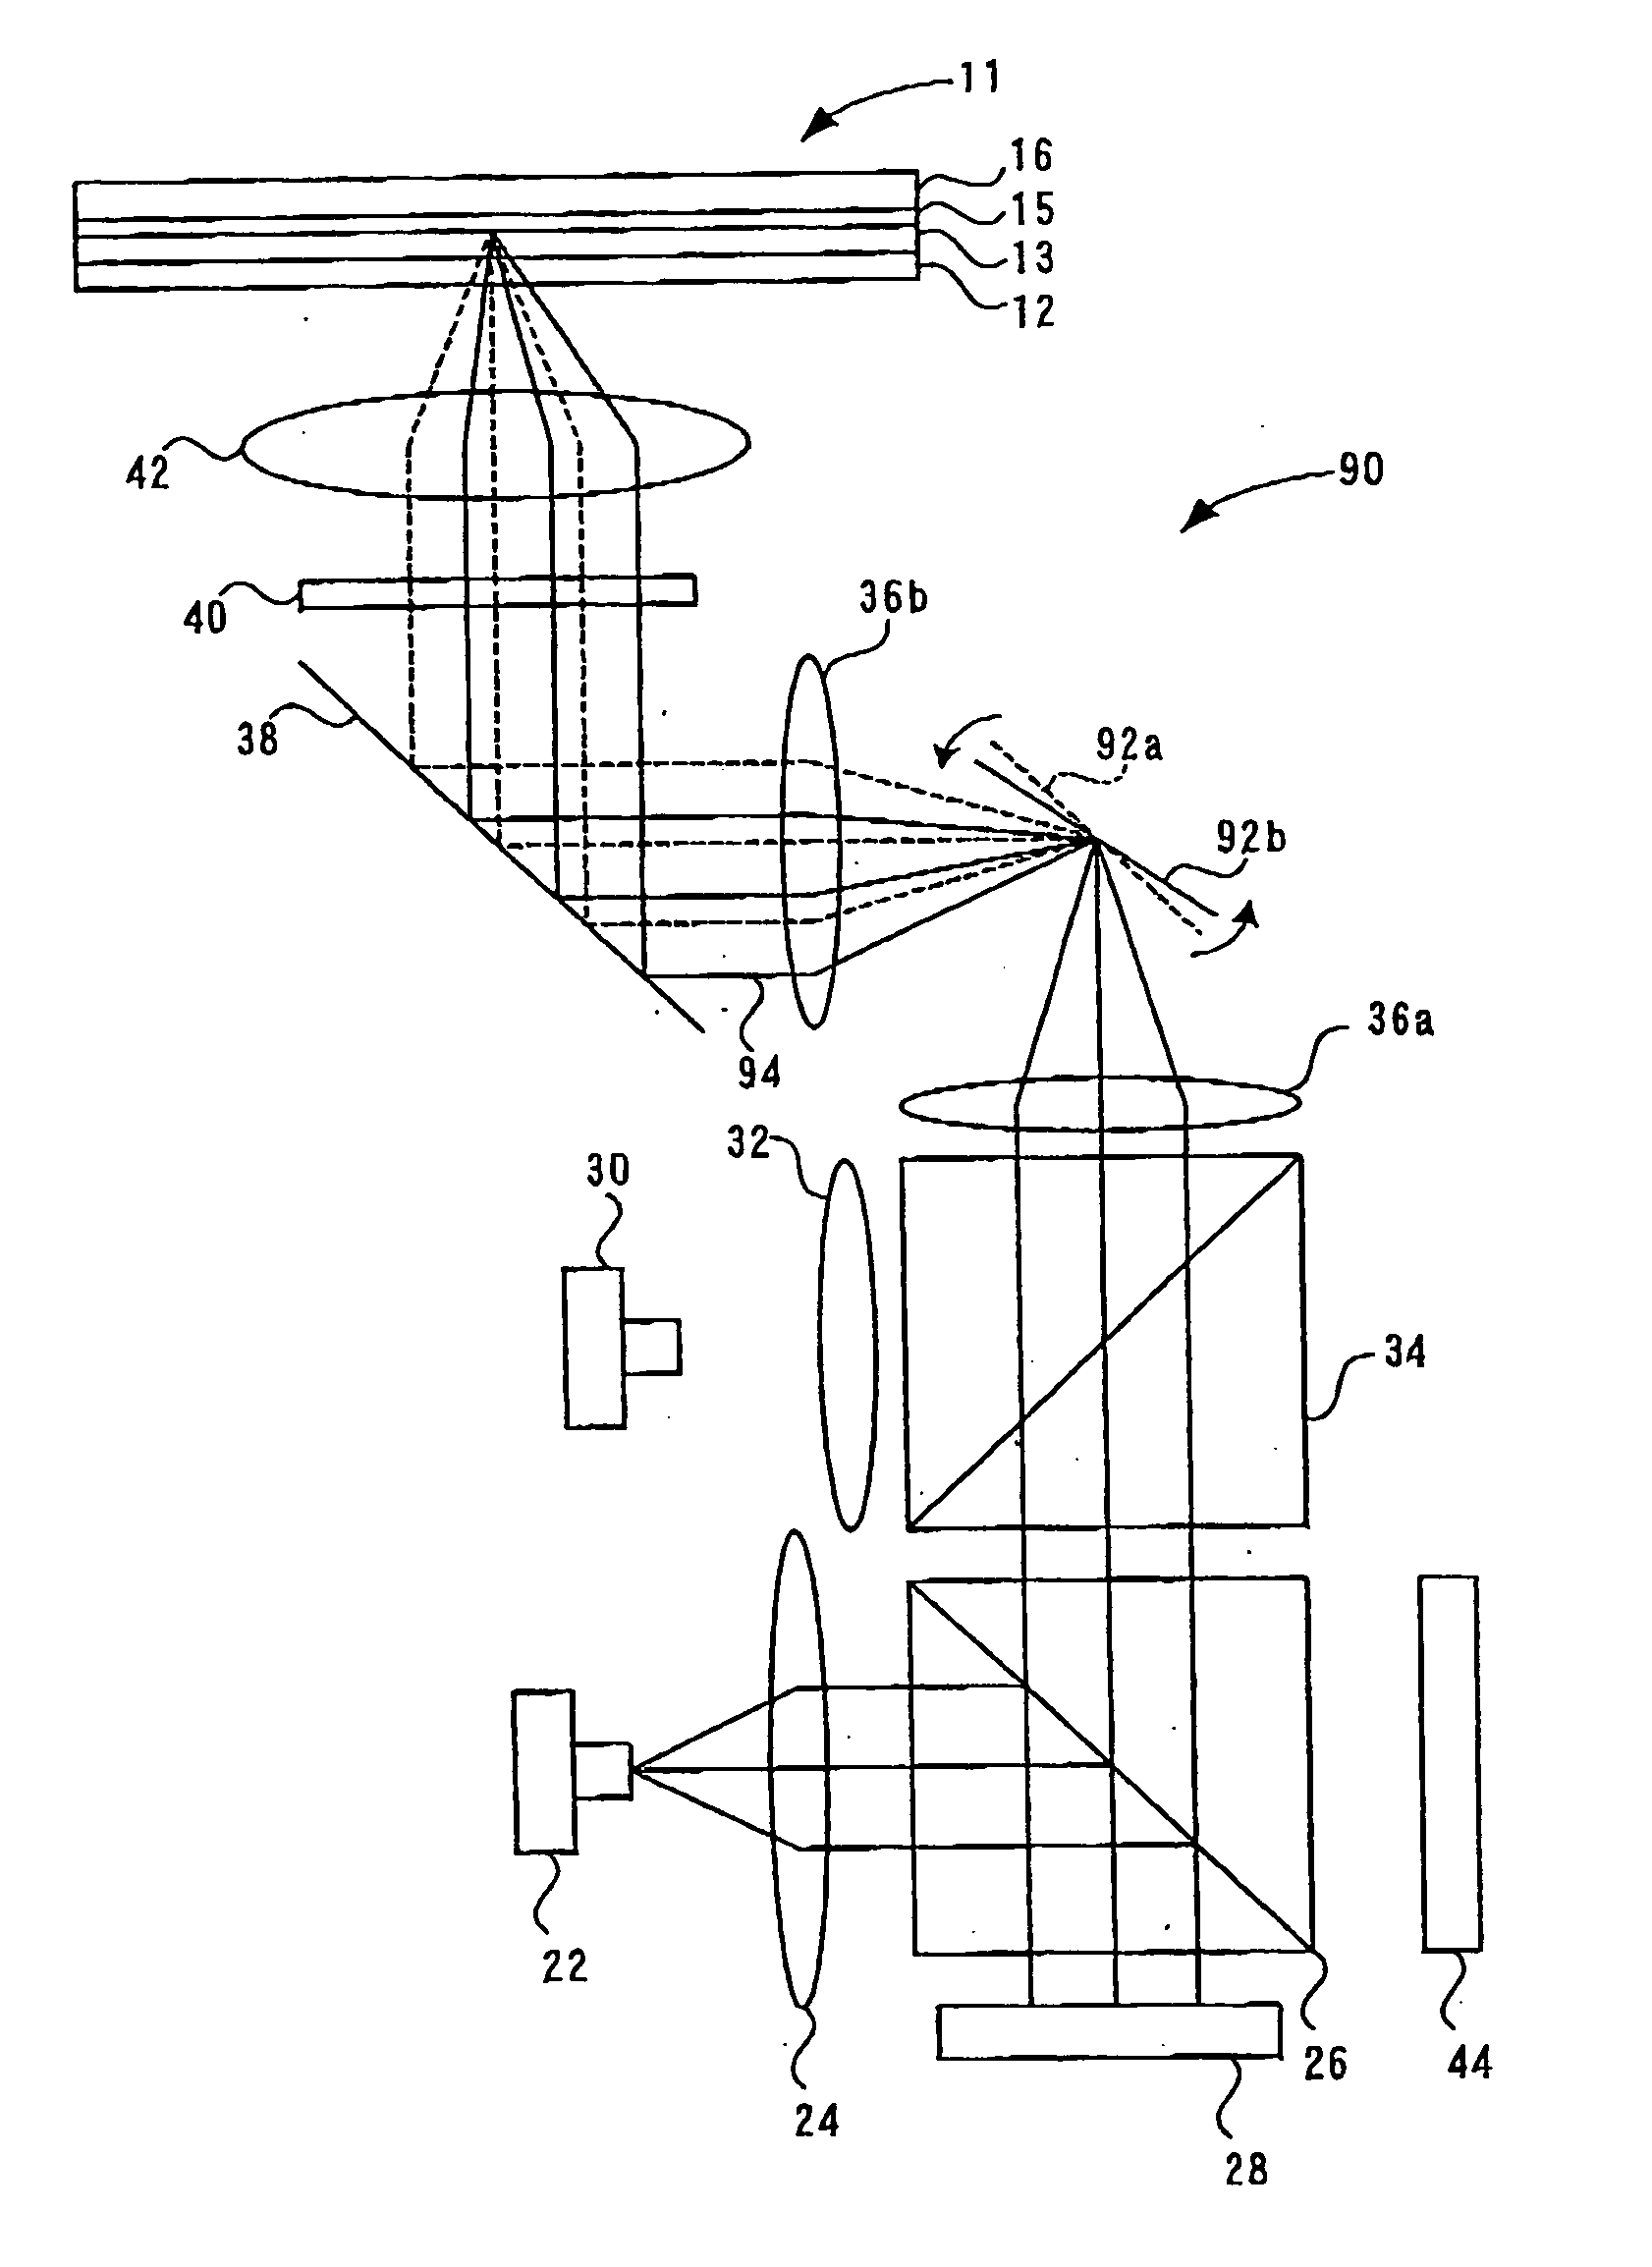 Optical information recording apparatus and optical information reproducing apparatus